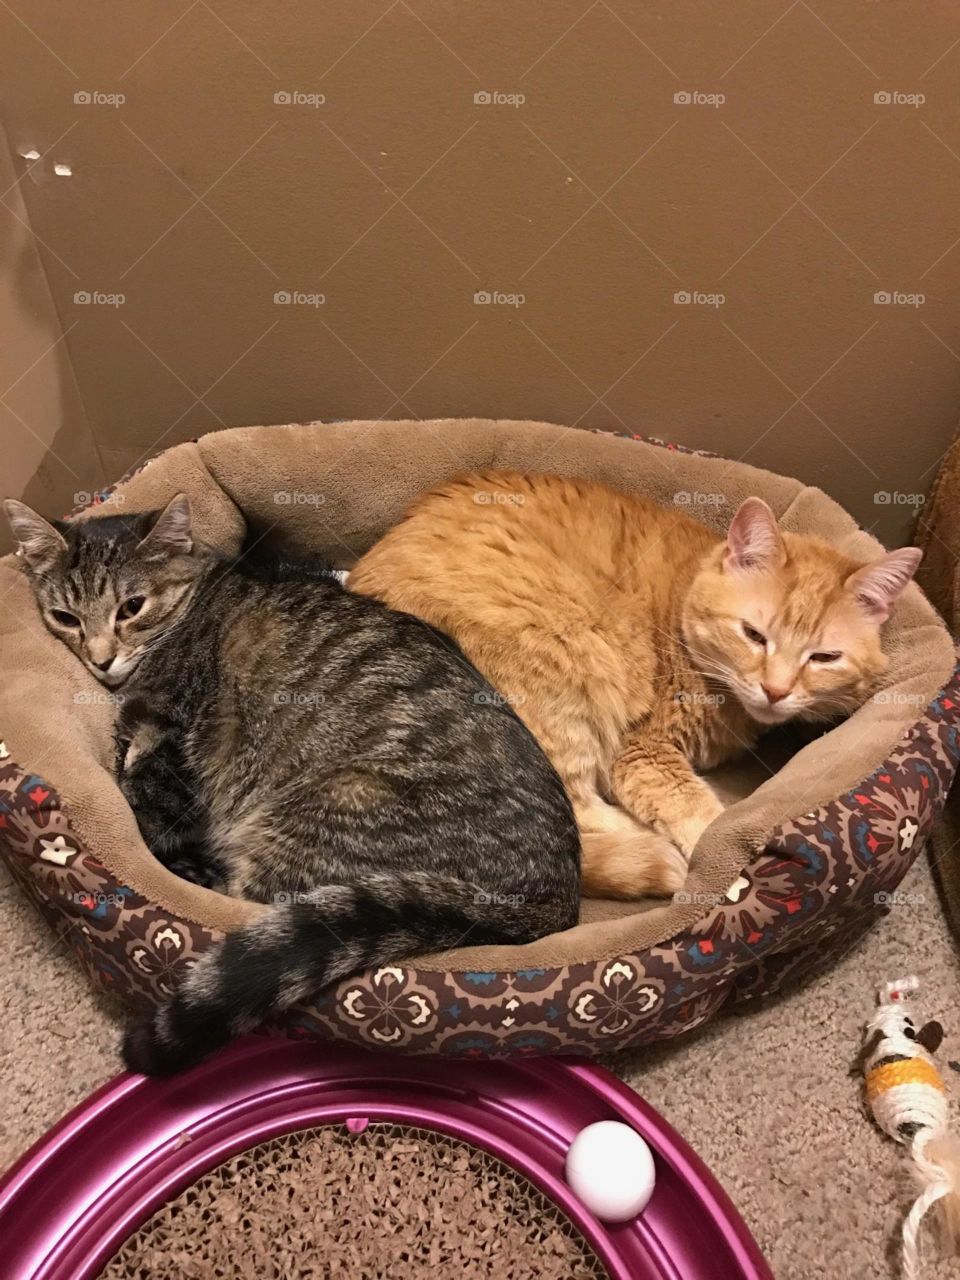 my 2 cats sharing a bed